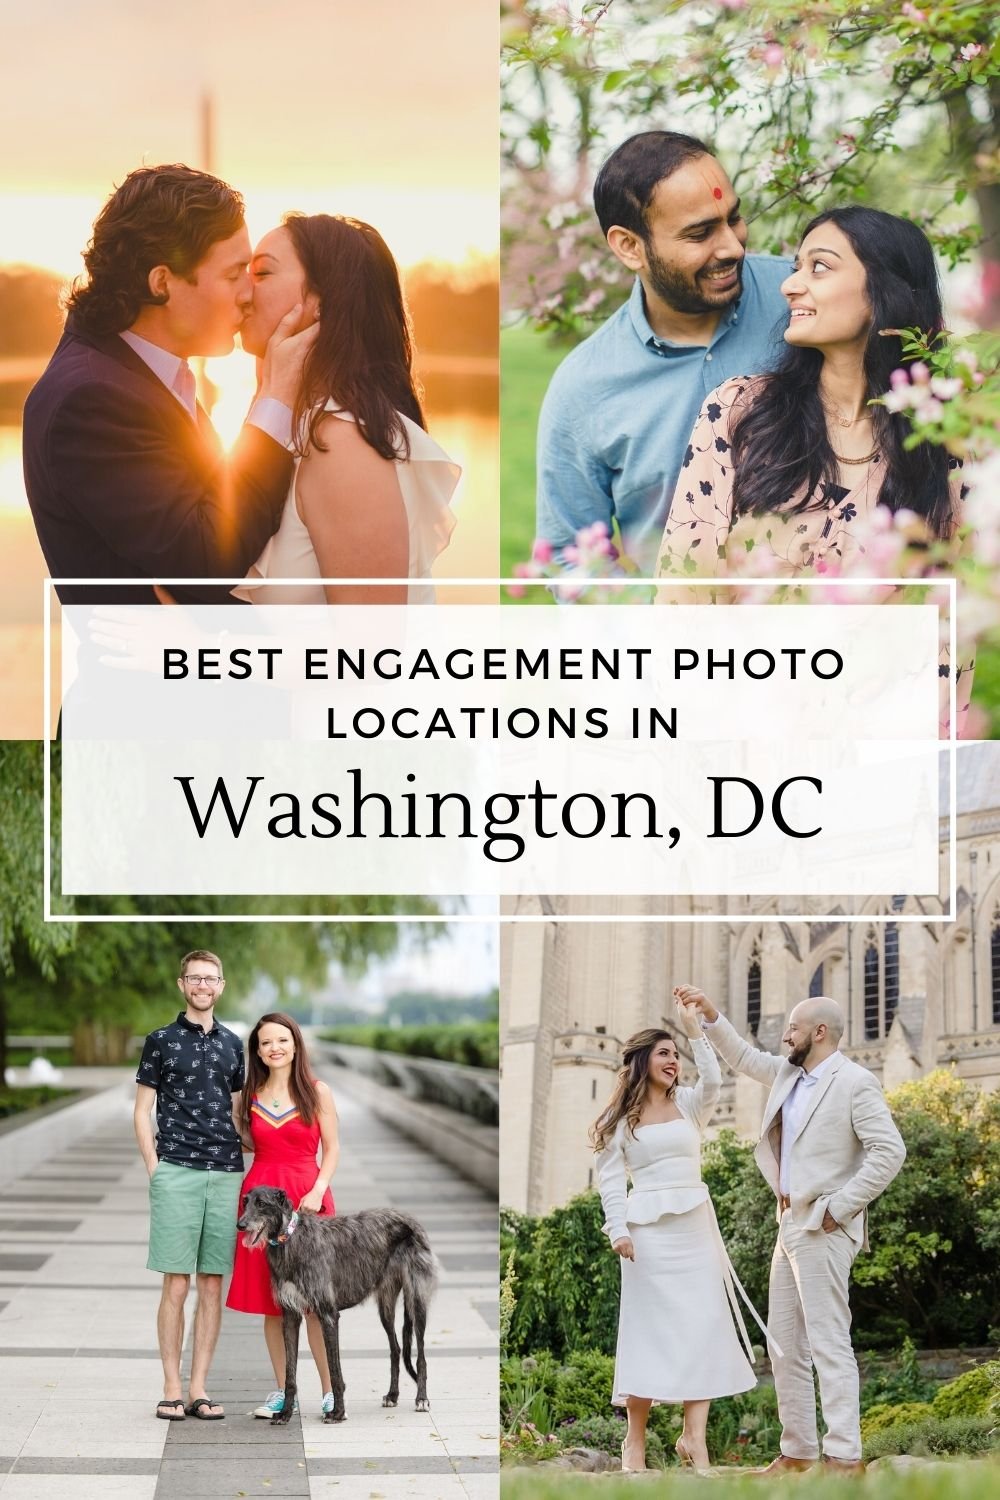 Engagement locations in Washington, DC